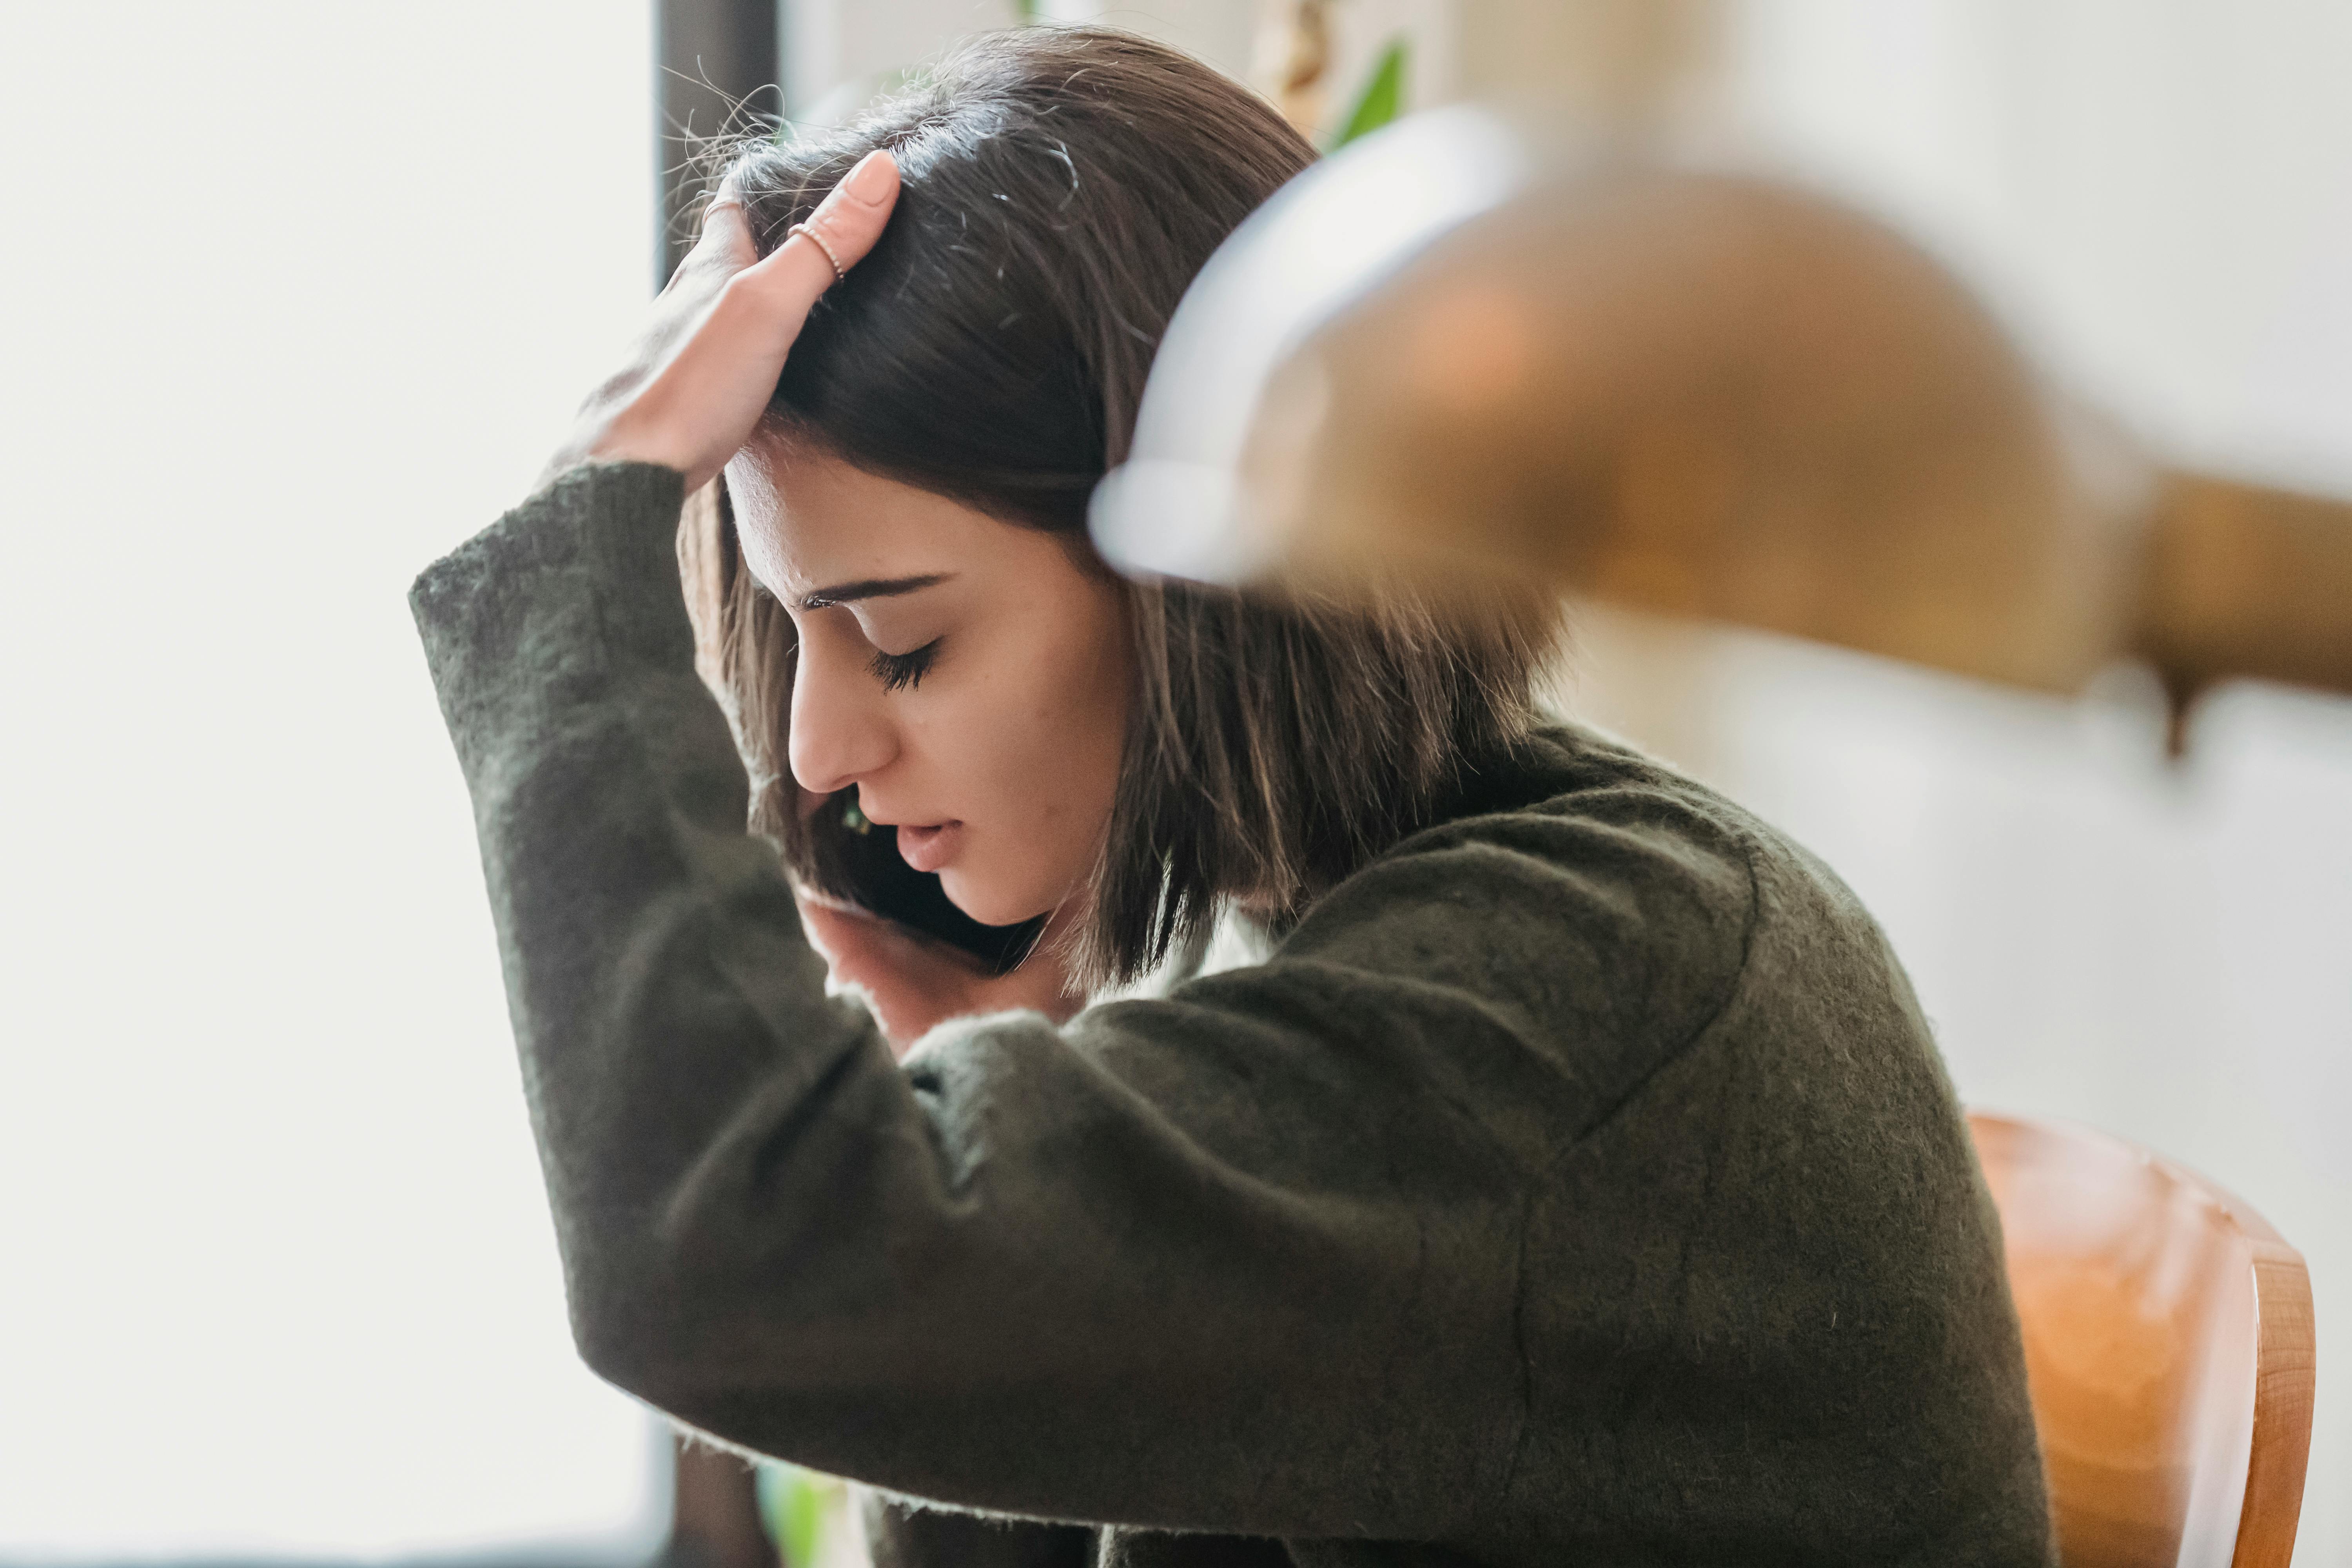 A frustrated woman talking on the phone | Source: Pexels